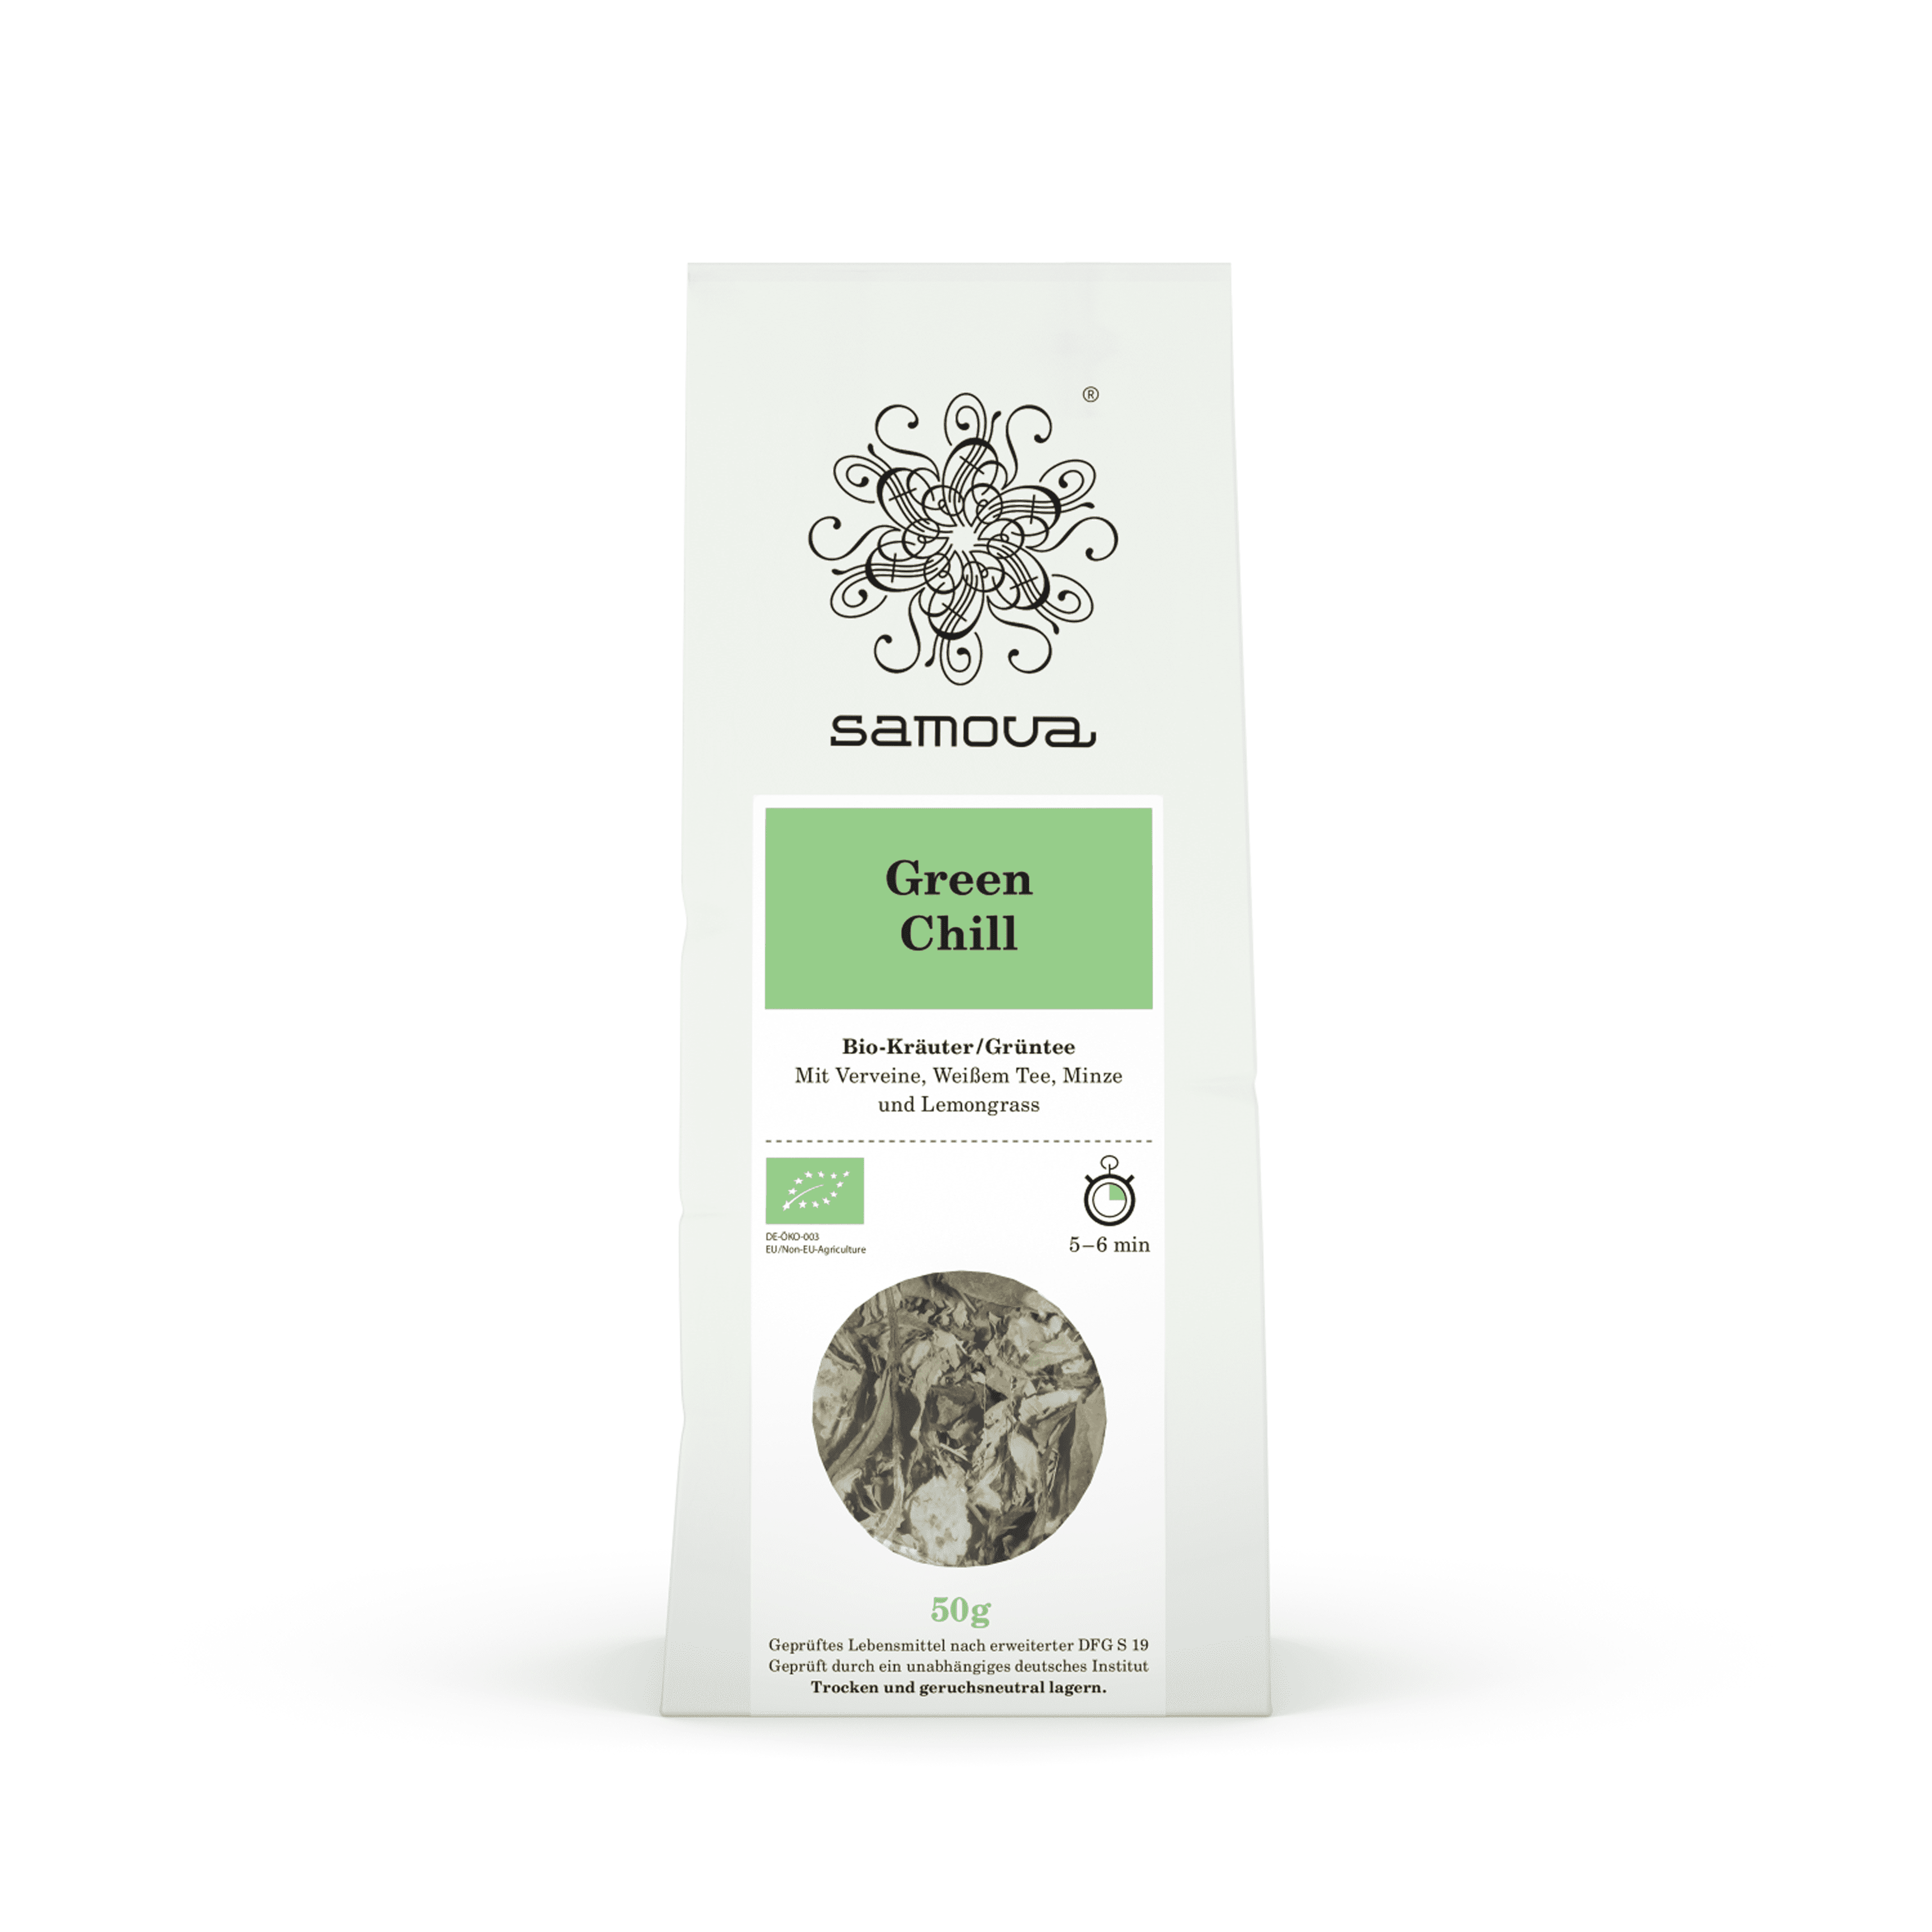 Pack of Green Chill tea